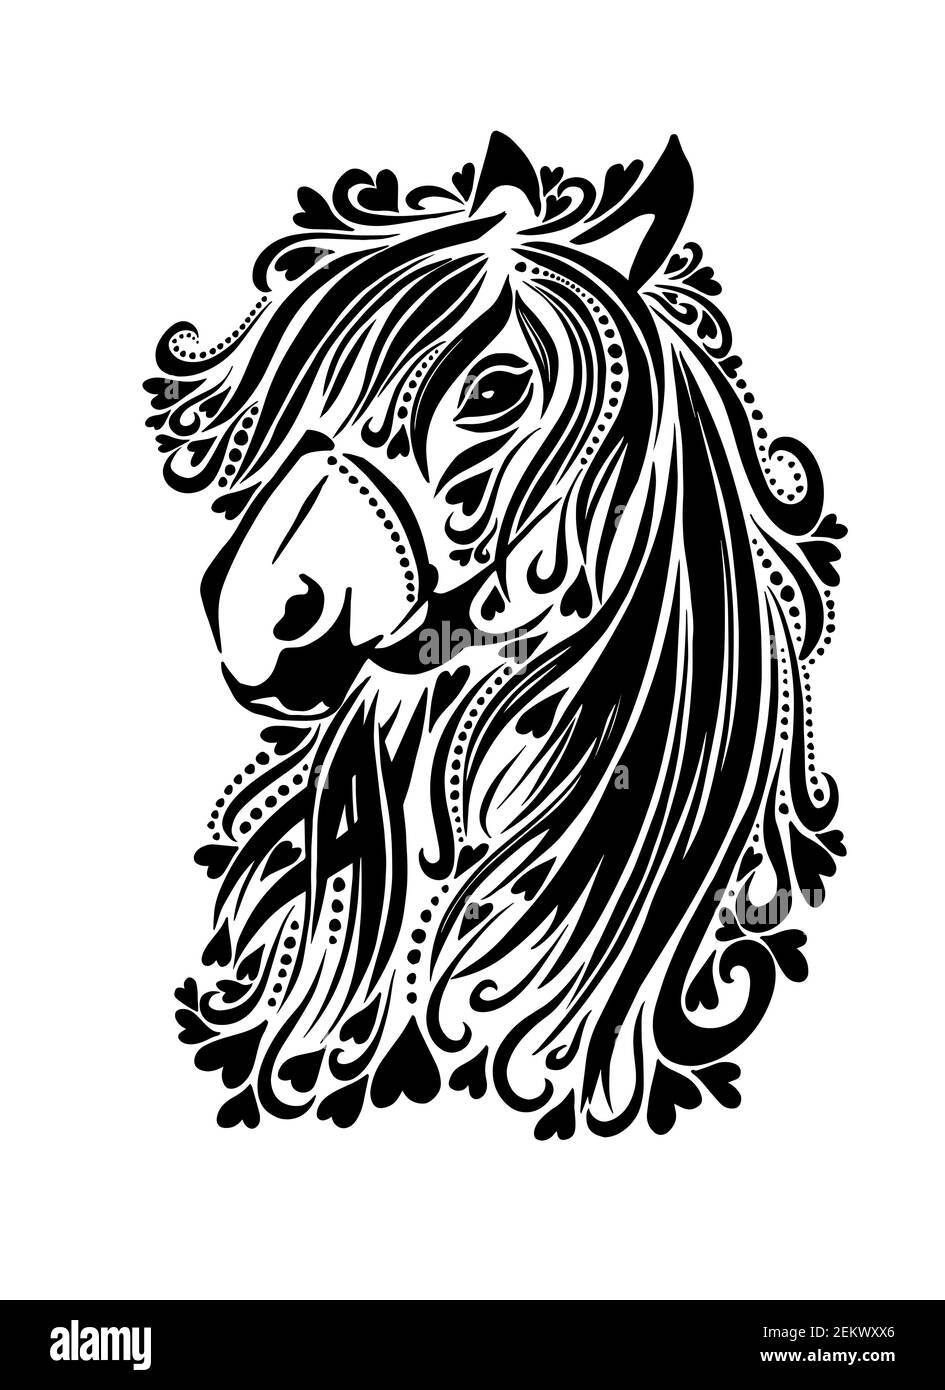 Tribal tattoo style illustration of head of a horse colt Stock Photo  Picture And Rights Managed Image Pic ZON14336643  agefotostock